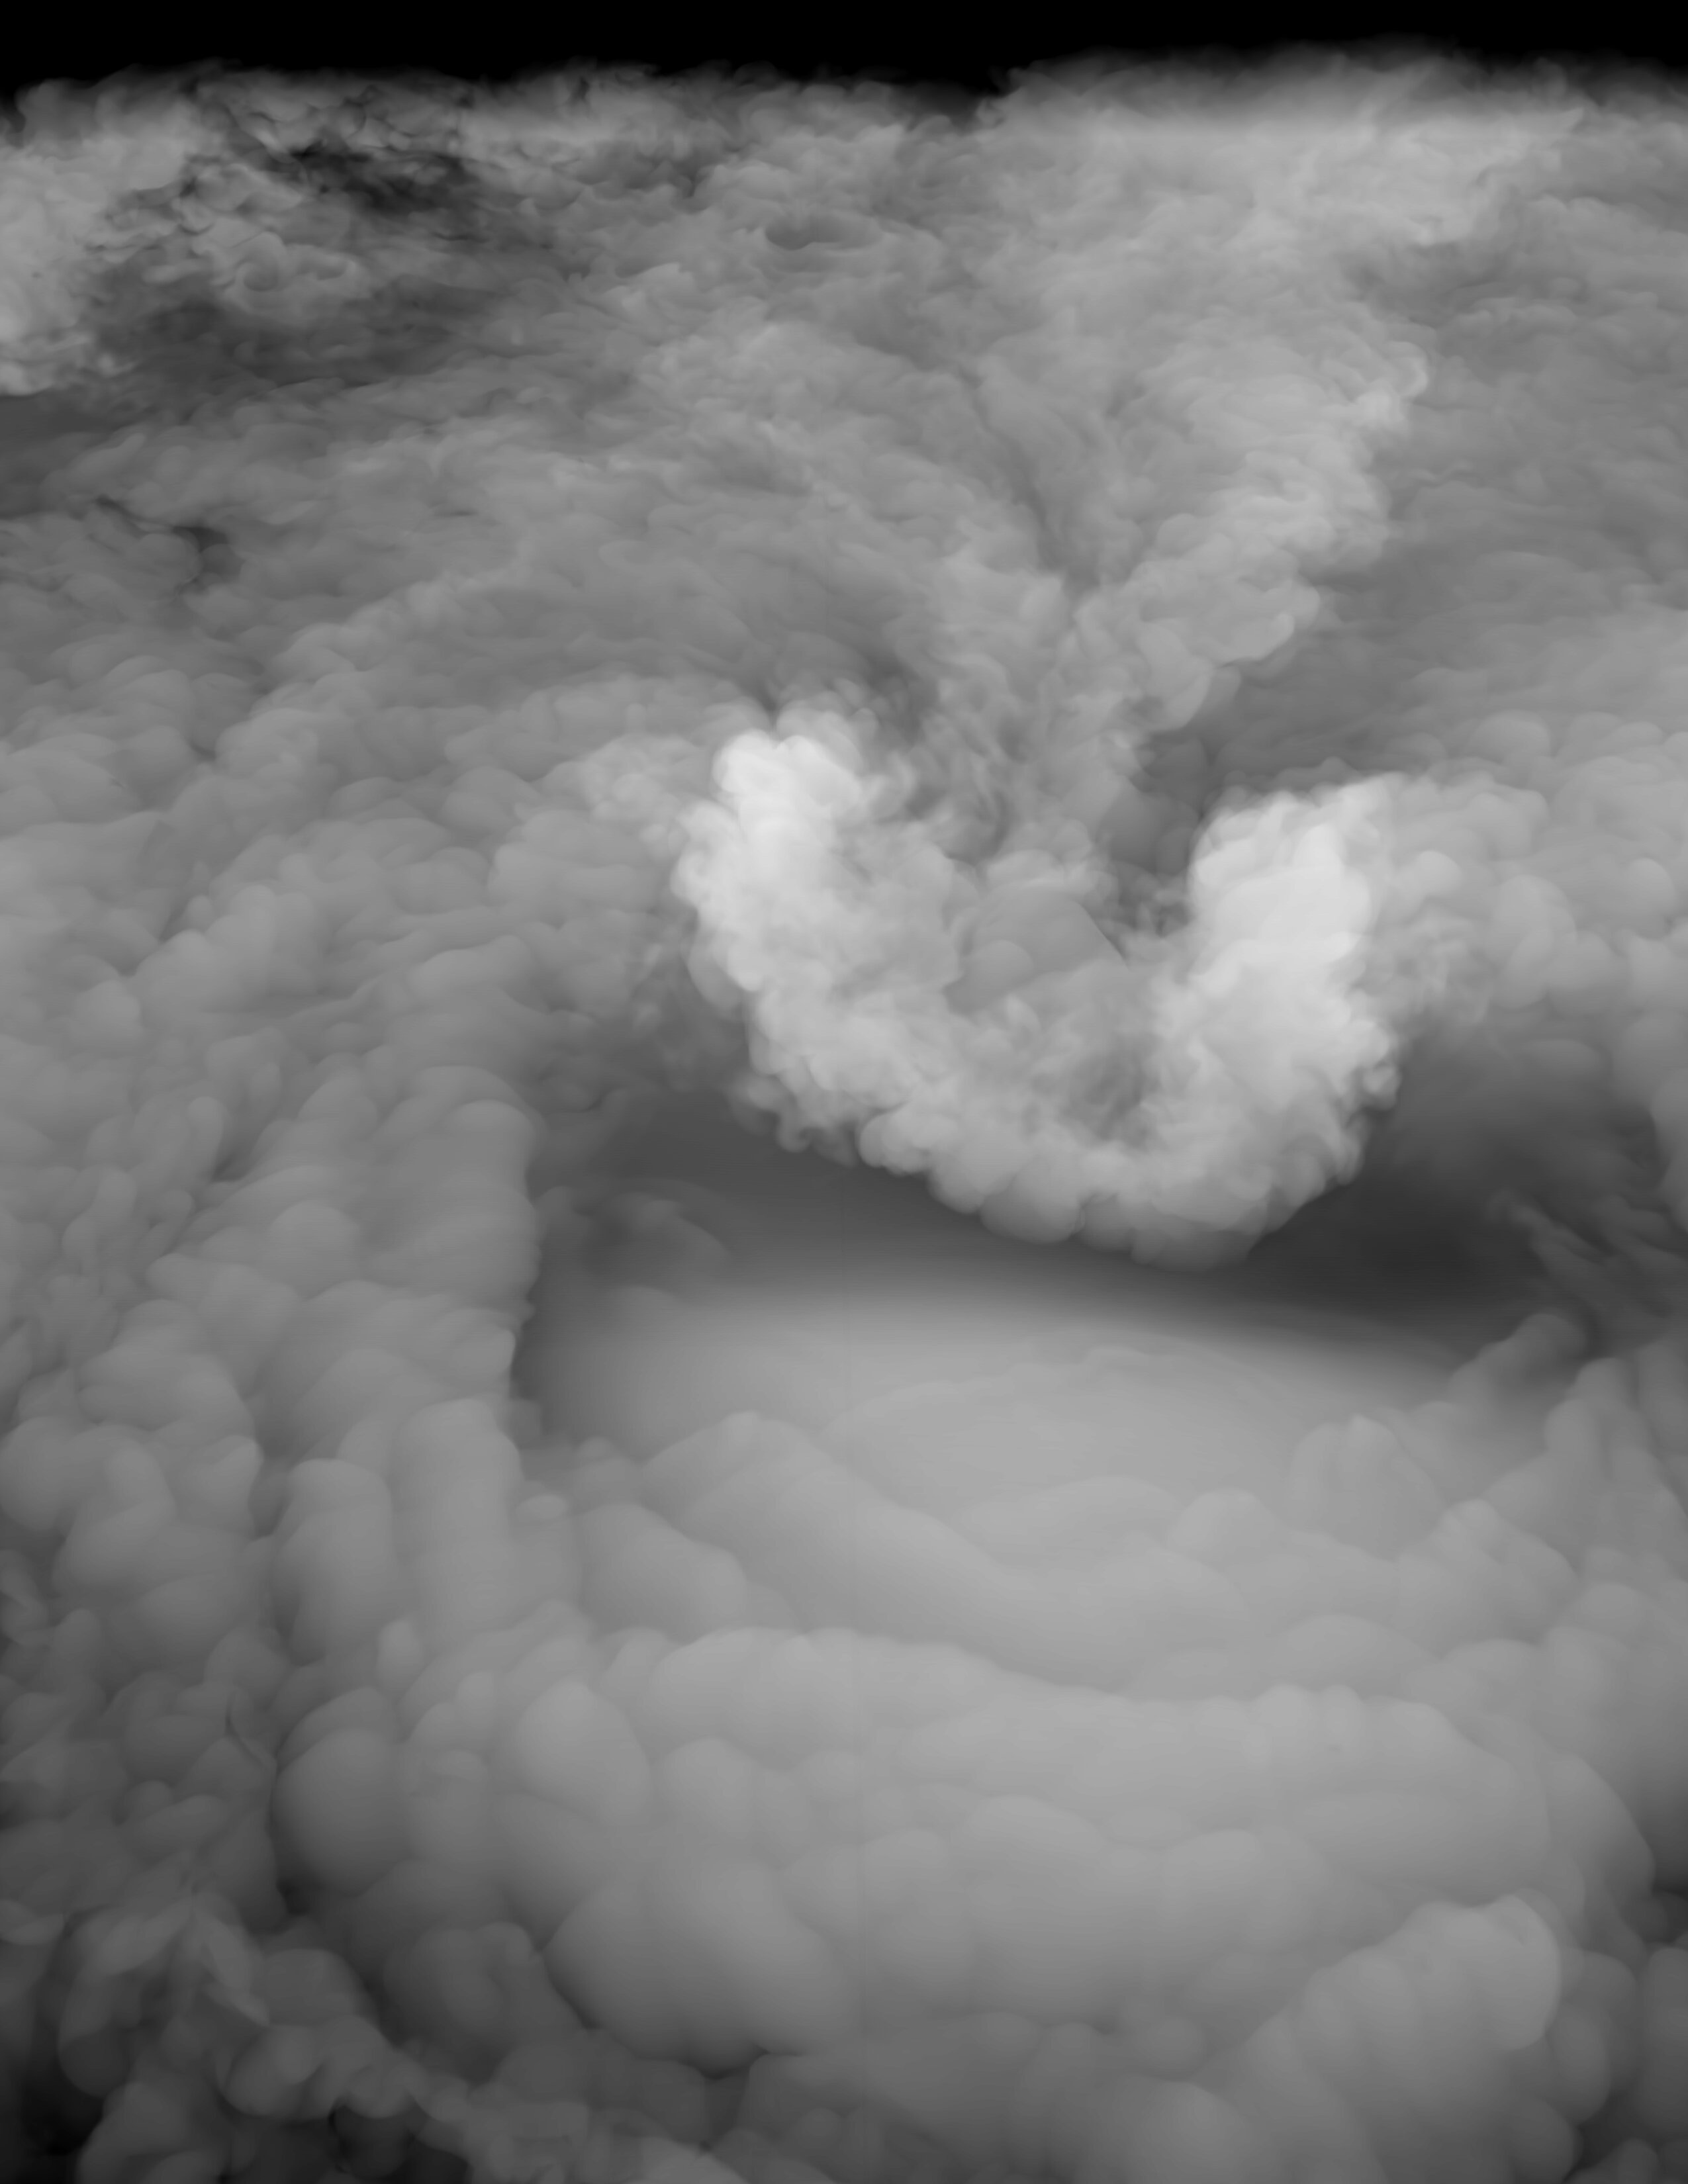 Scientists solve mystery of icy plumes that may foretell deadly supercell storms